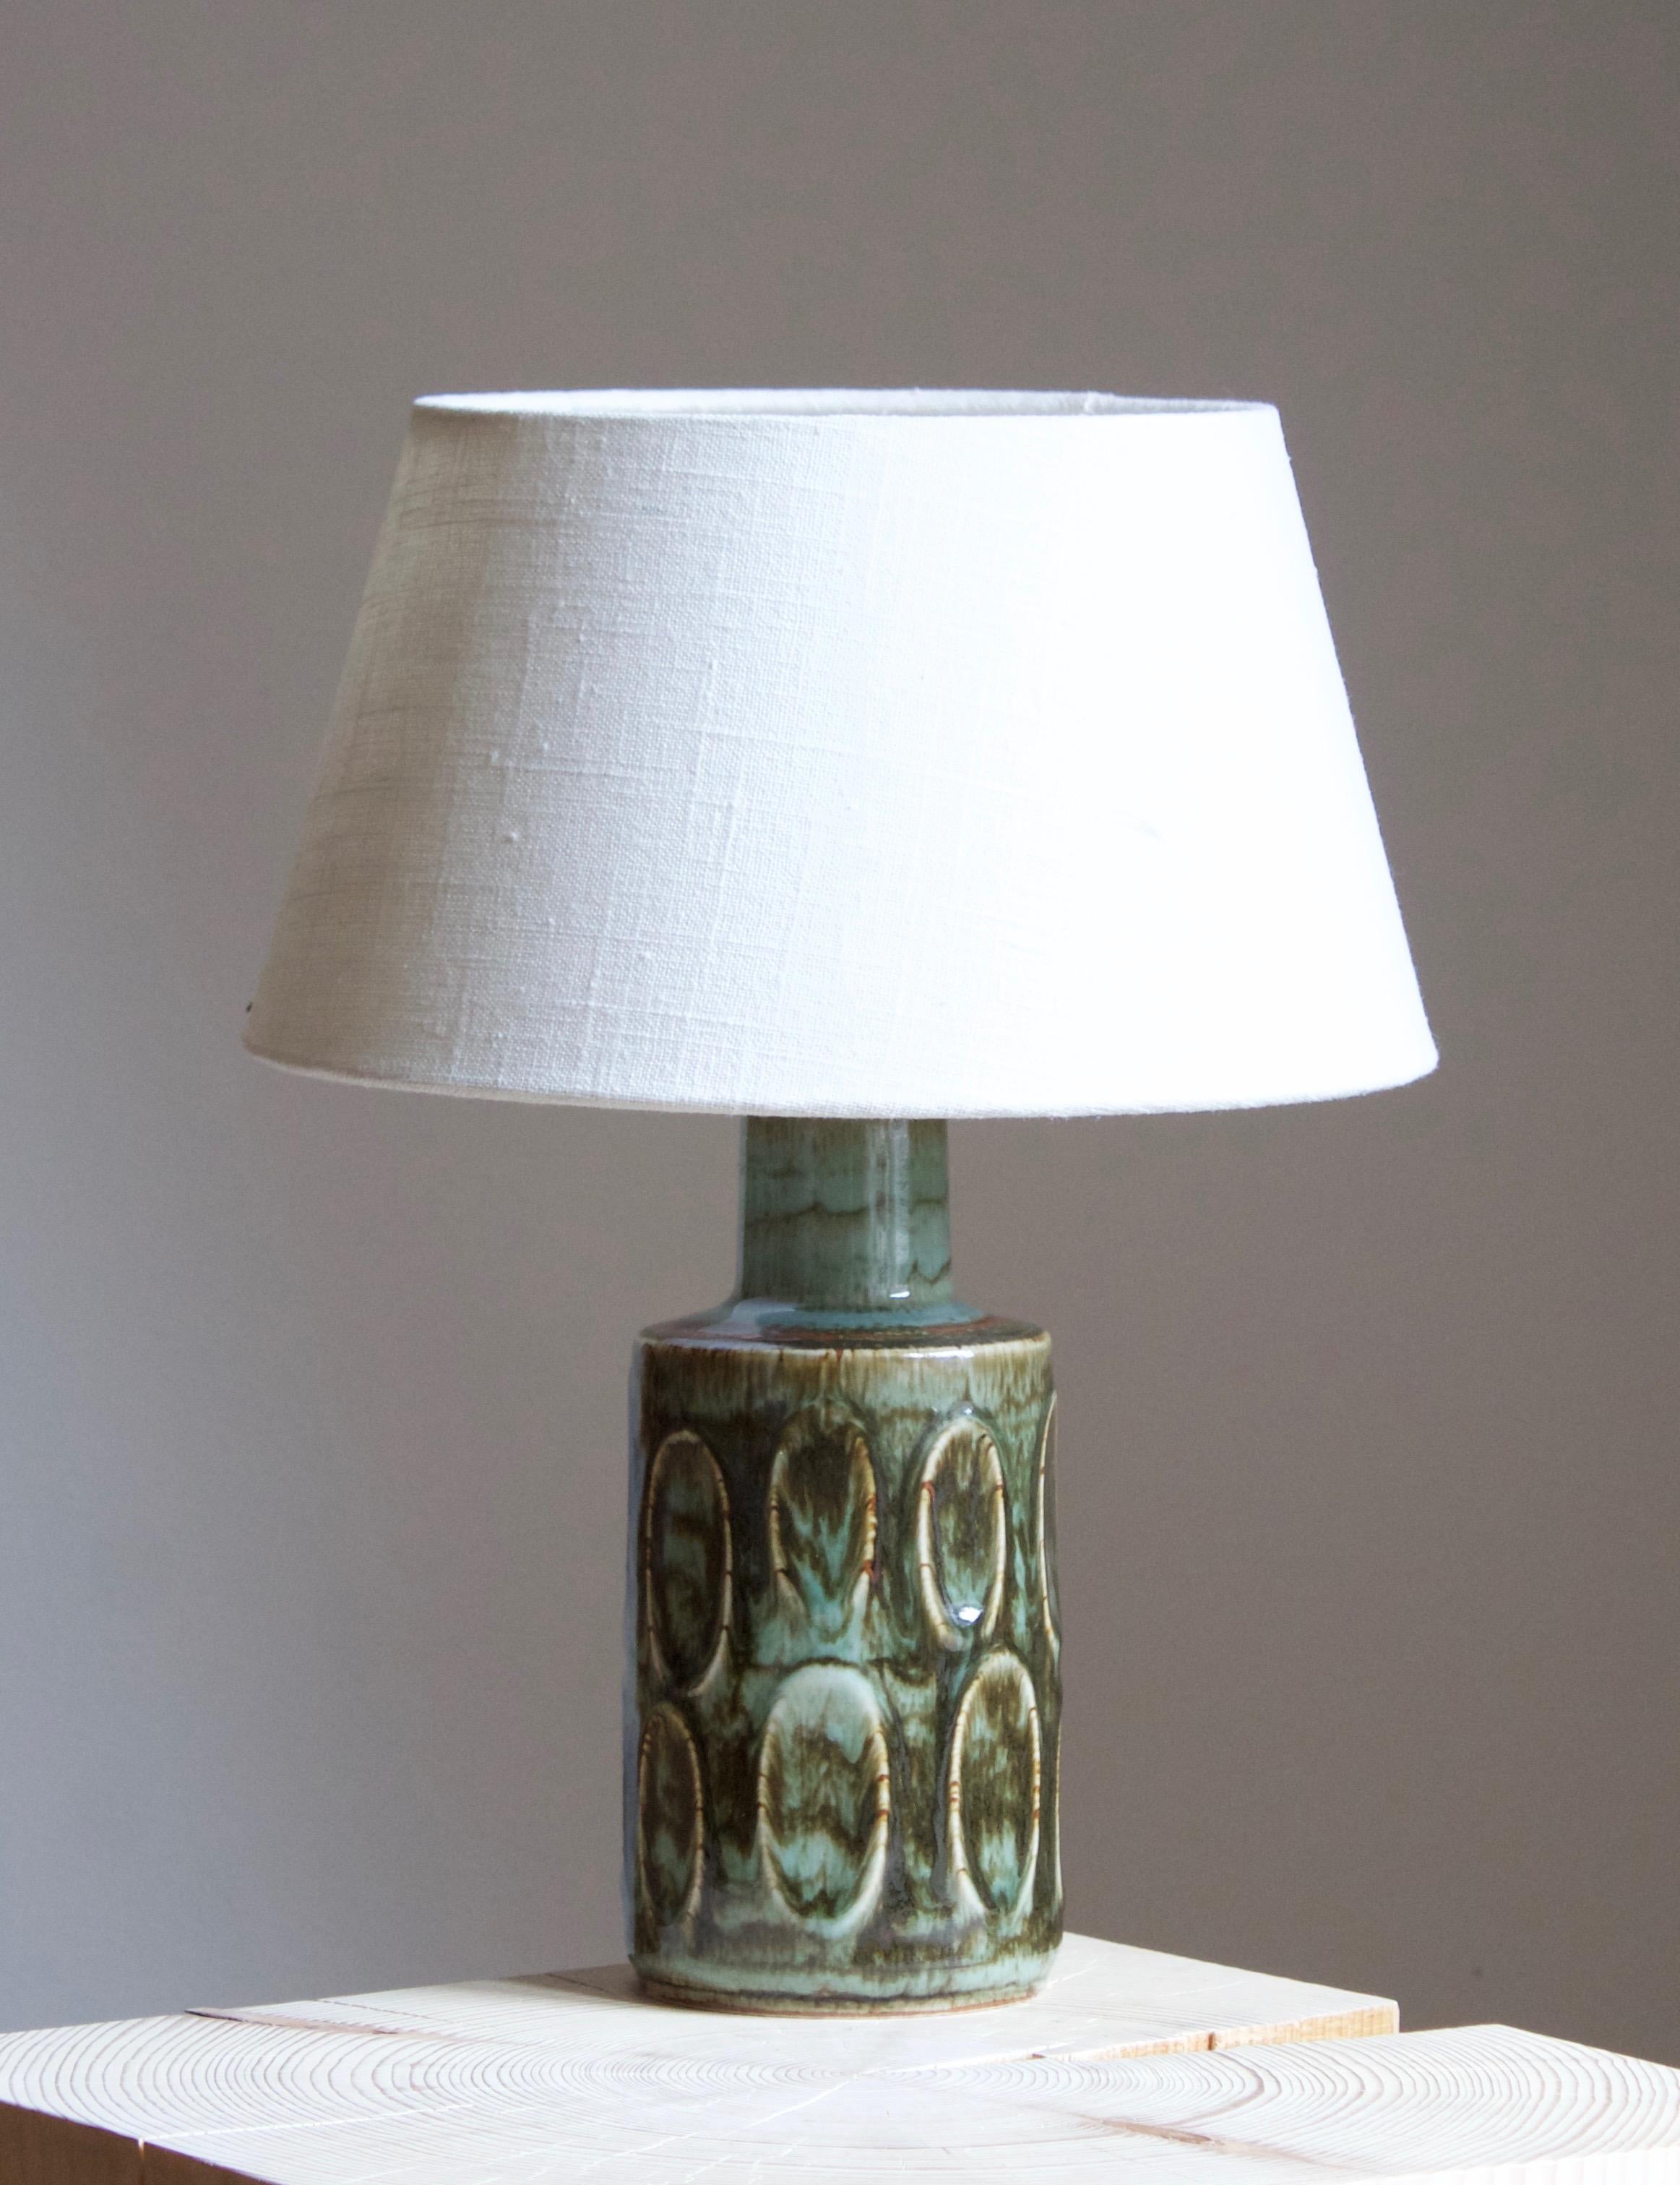 A table lamp produced by Søholm Keramik, located on the island of Bornholm in Denmark. Features a highly artistic glazed and incised decor. 

Sold without lampshade. Stated dimensions exclude the lampshade. Height includes socket.

Glaze features